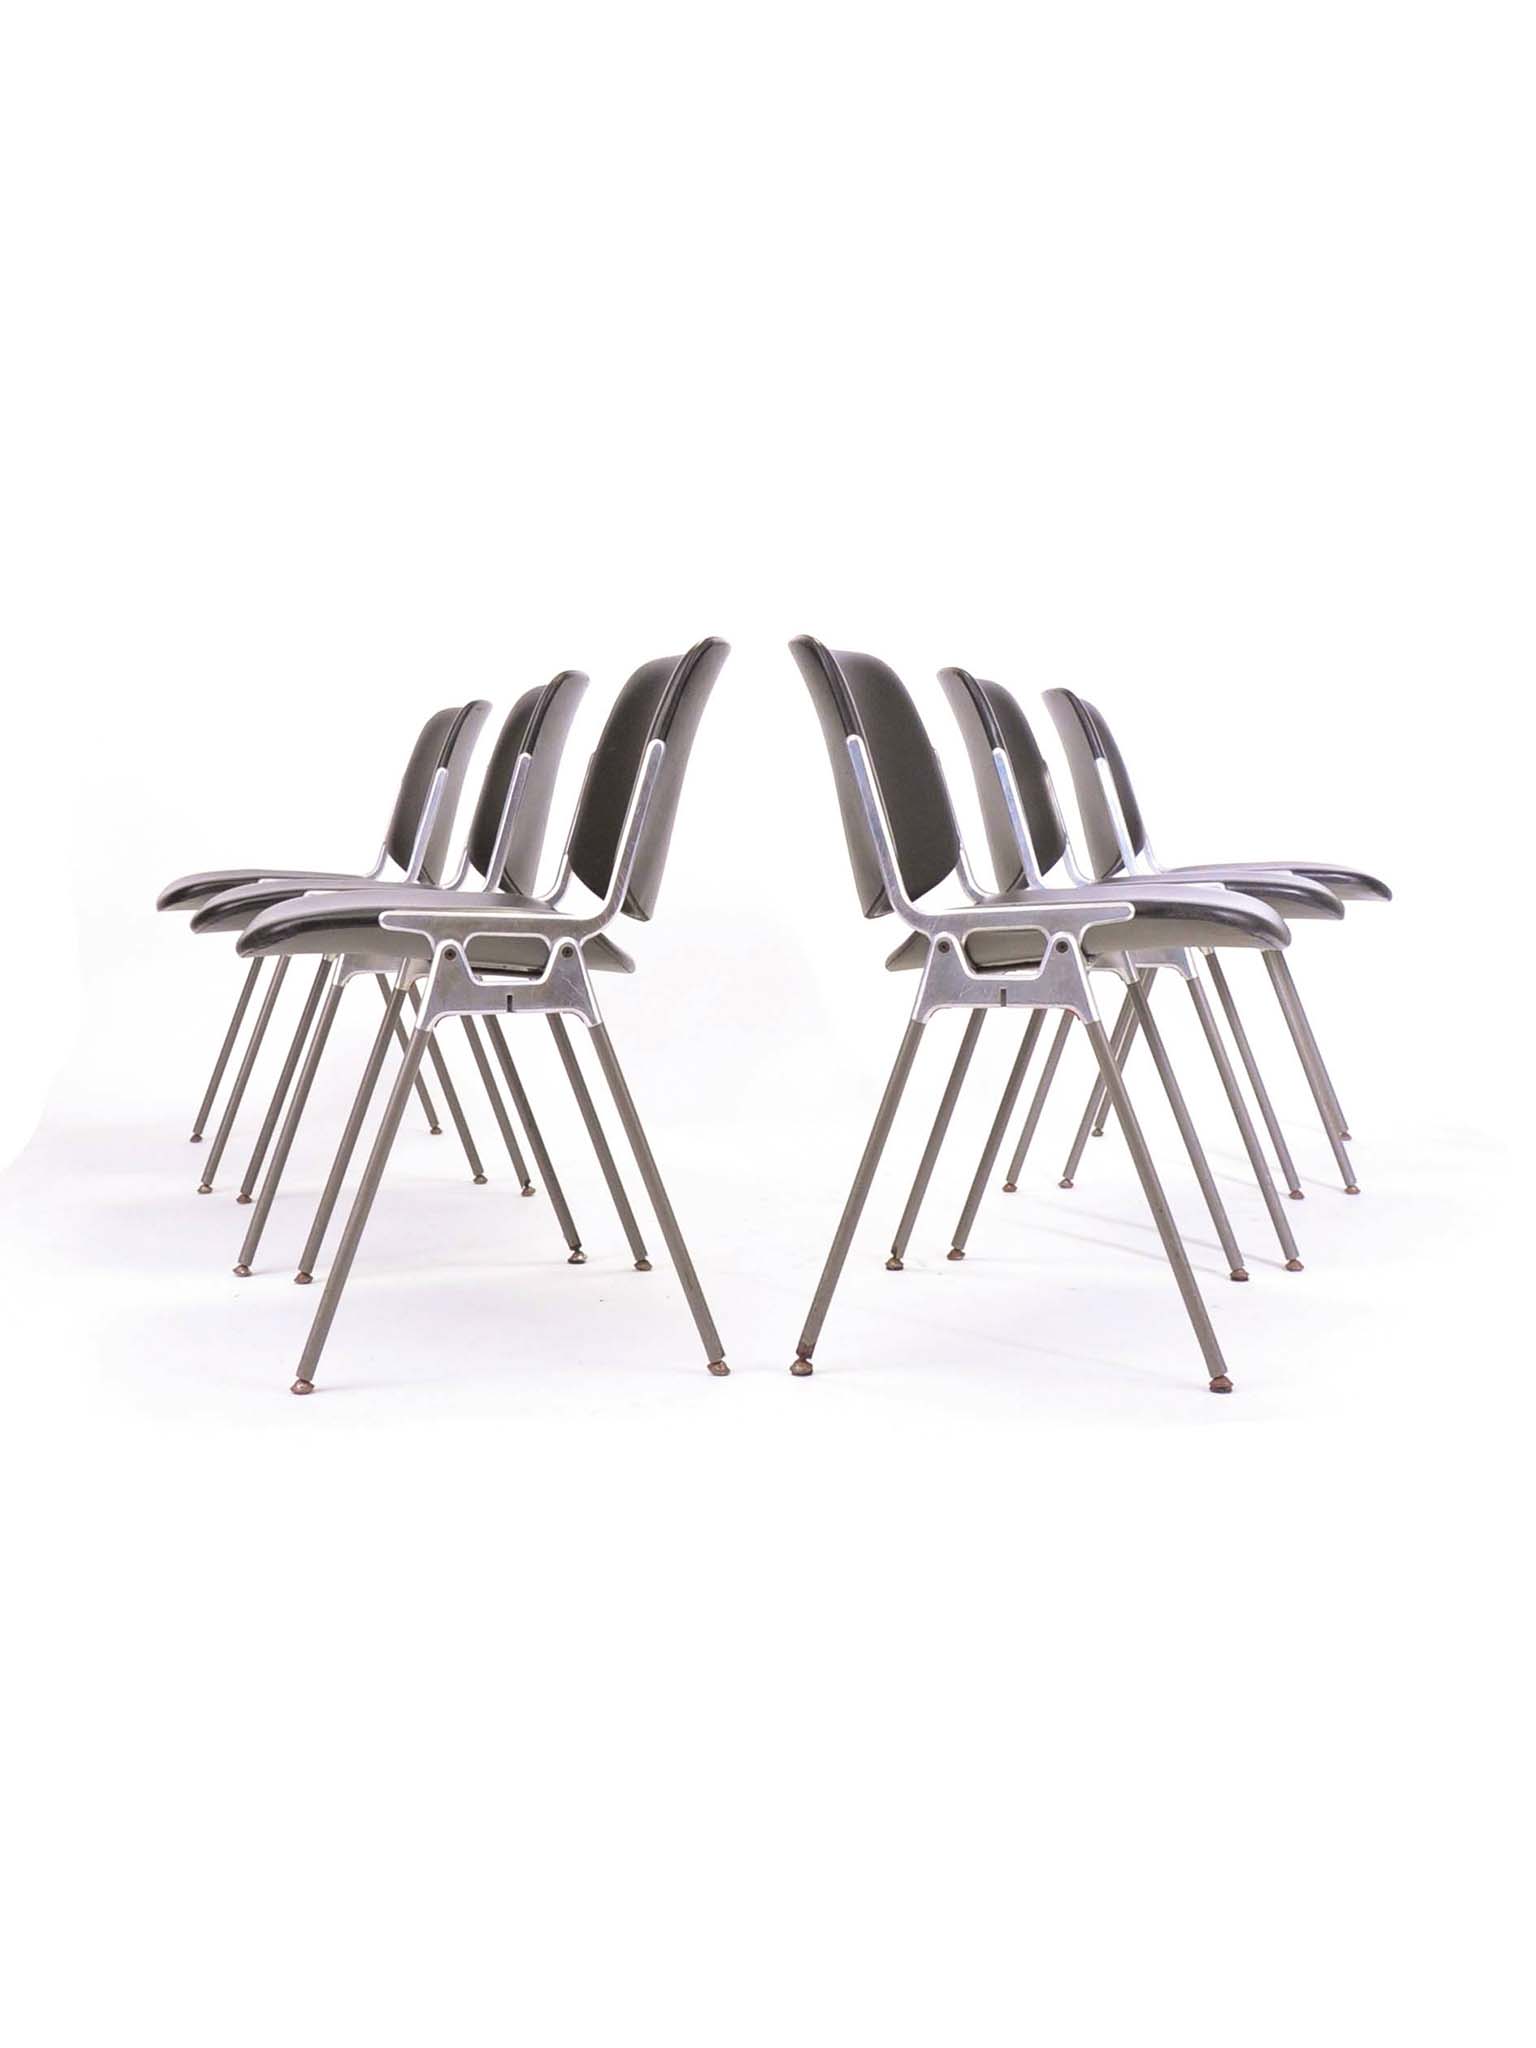 SET OF FOUR CHAIRS BY GIANCARLO PIRETTI